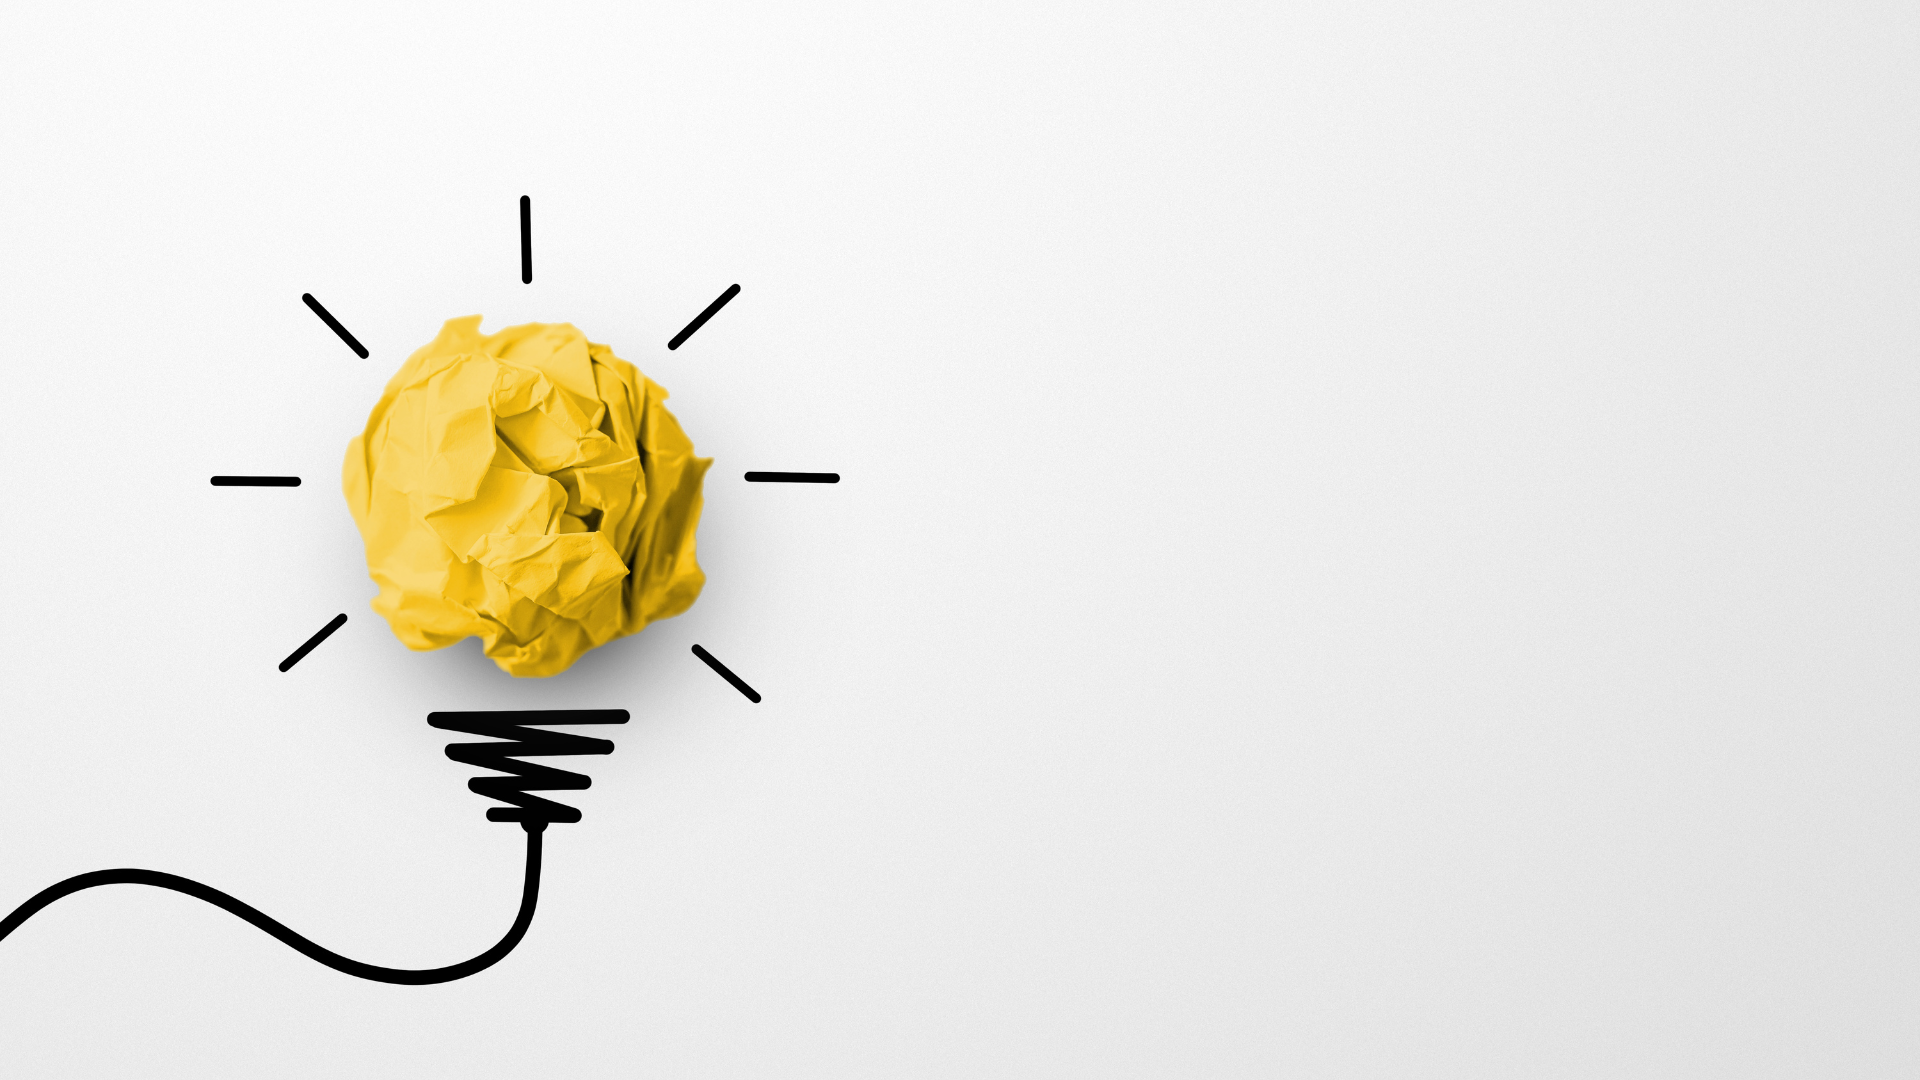 How to Create a Winning Business Idea